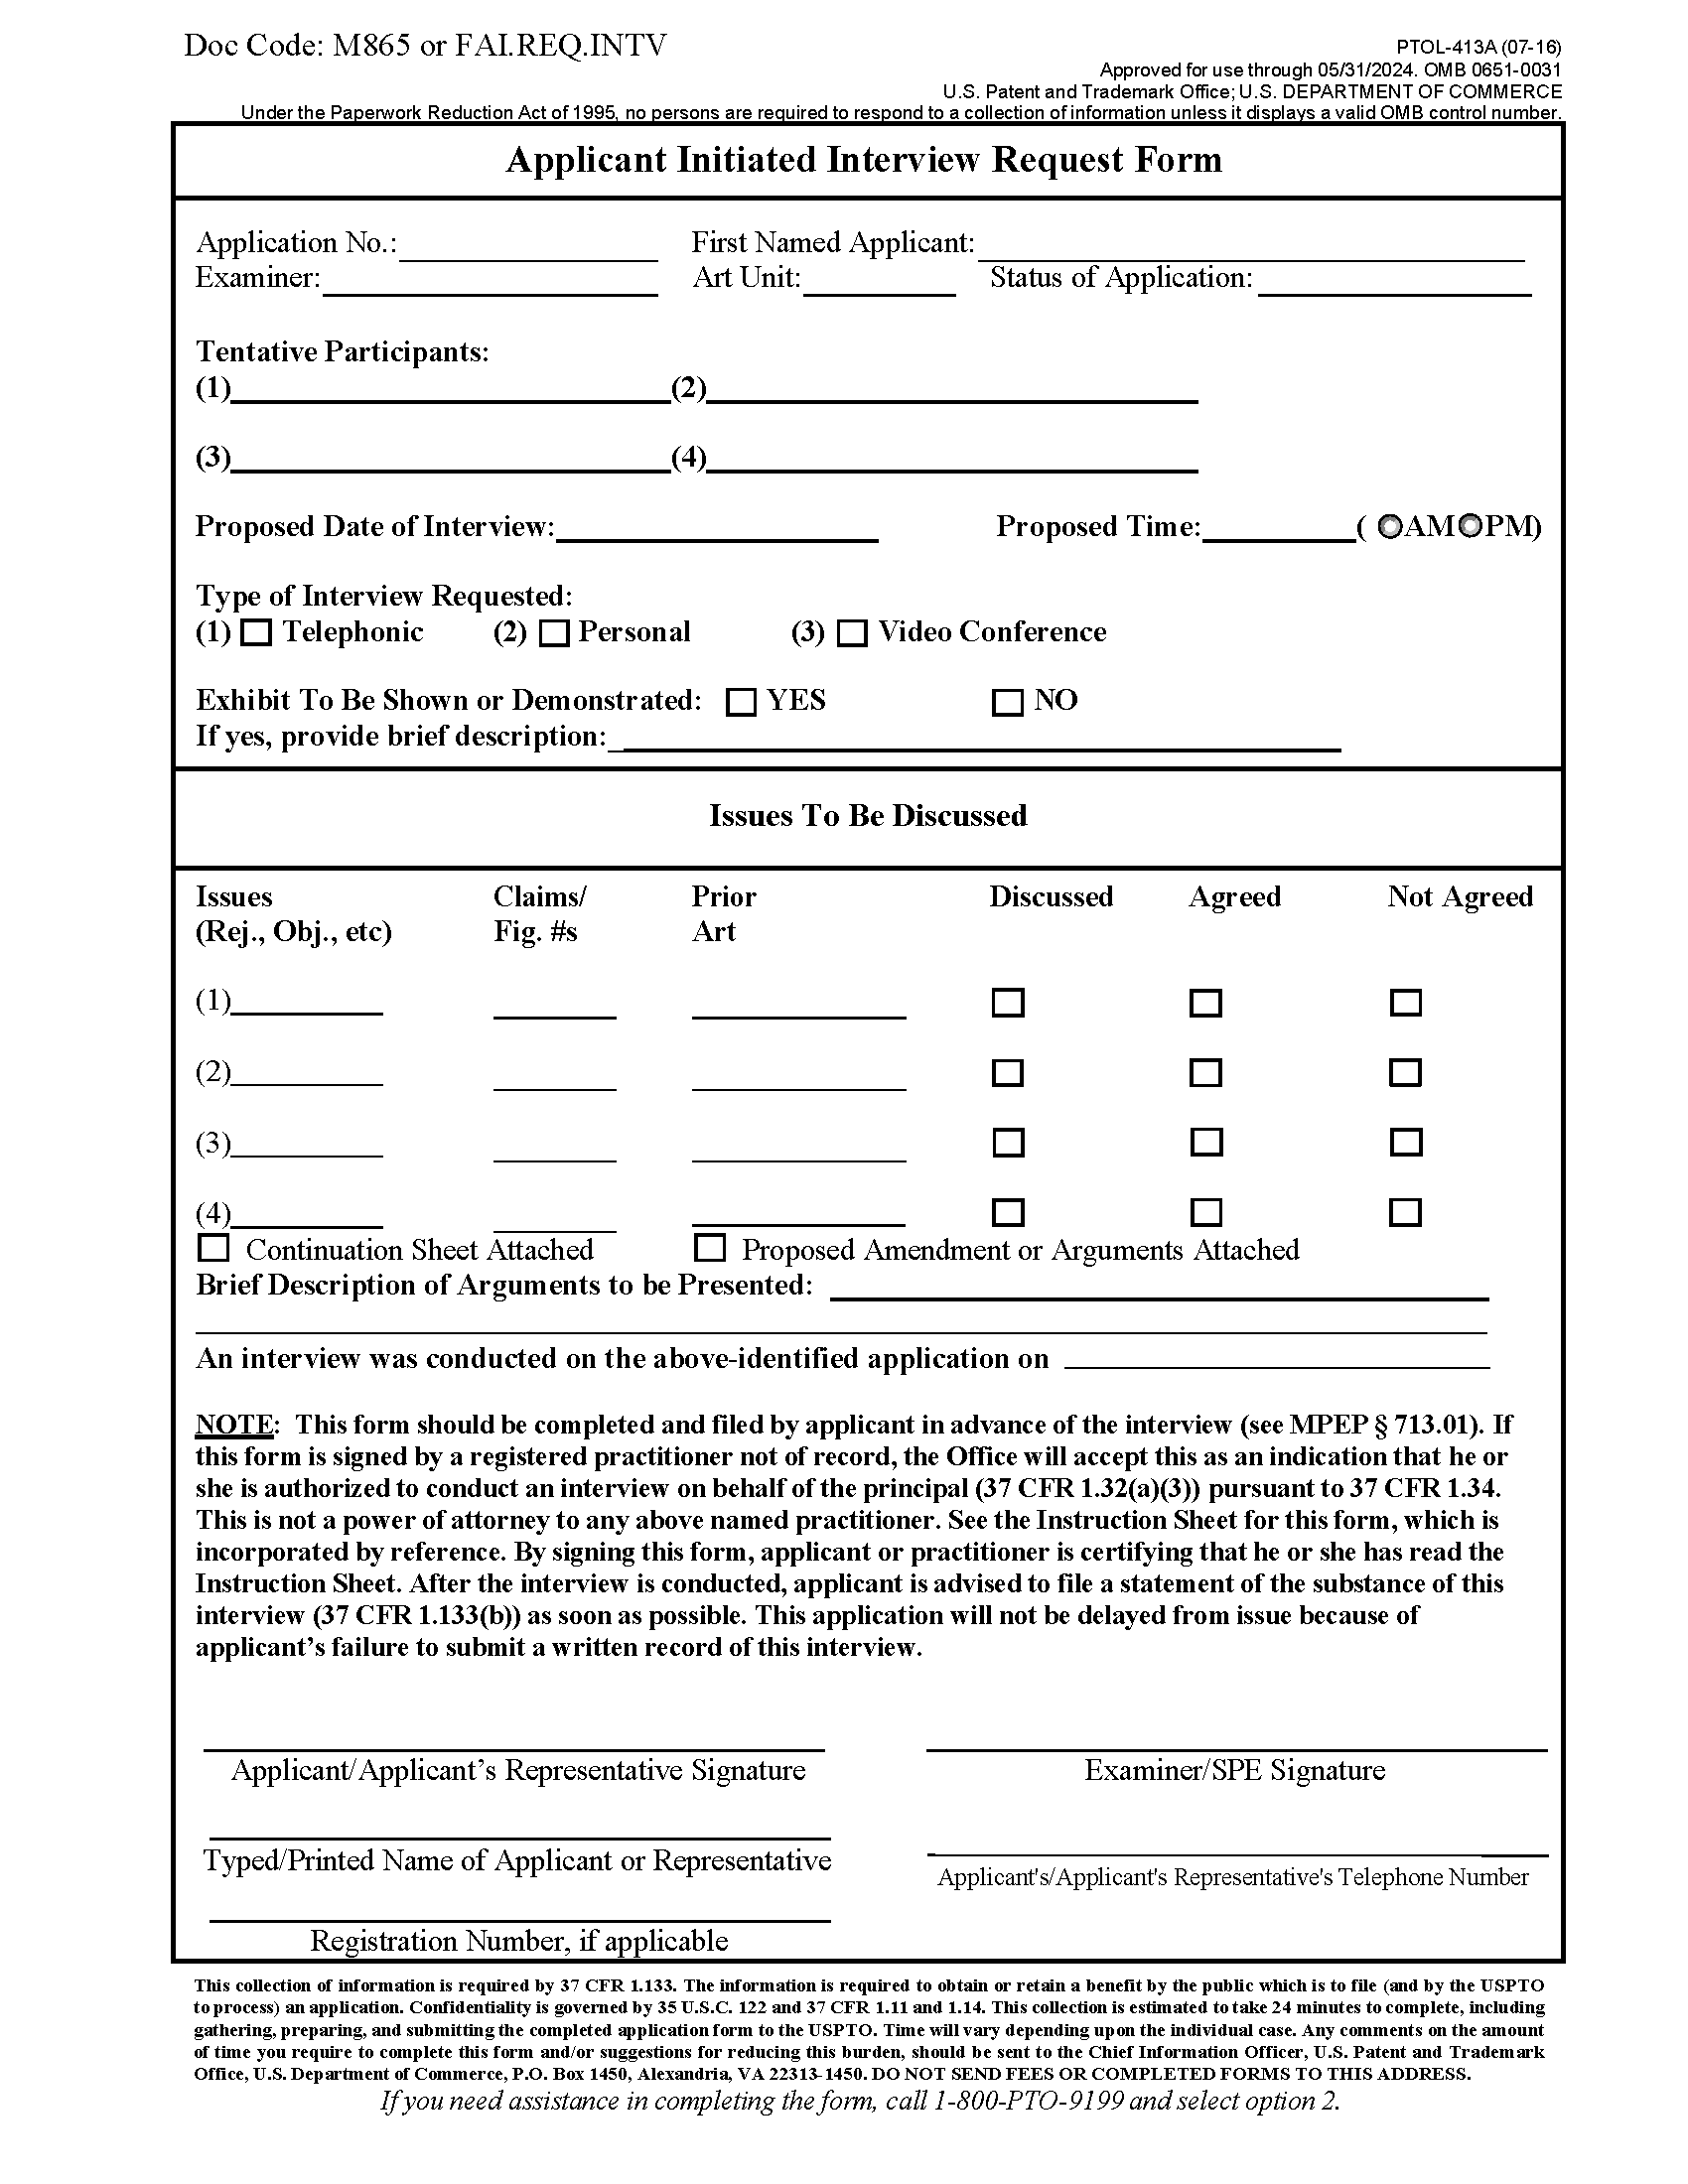 Form PTOL 413A Applicant Initiated Interview Request Form